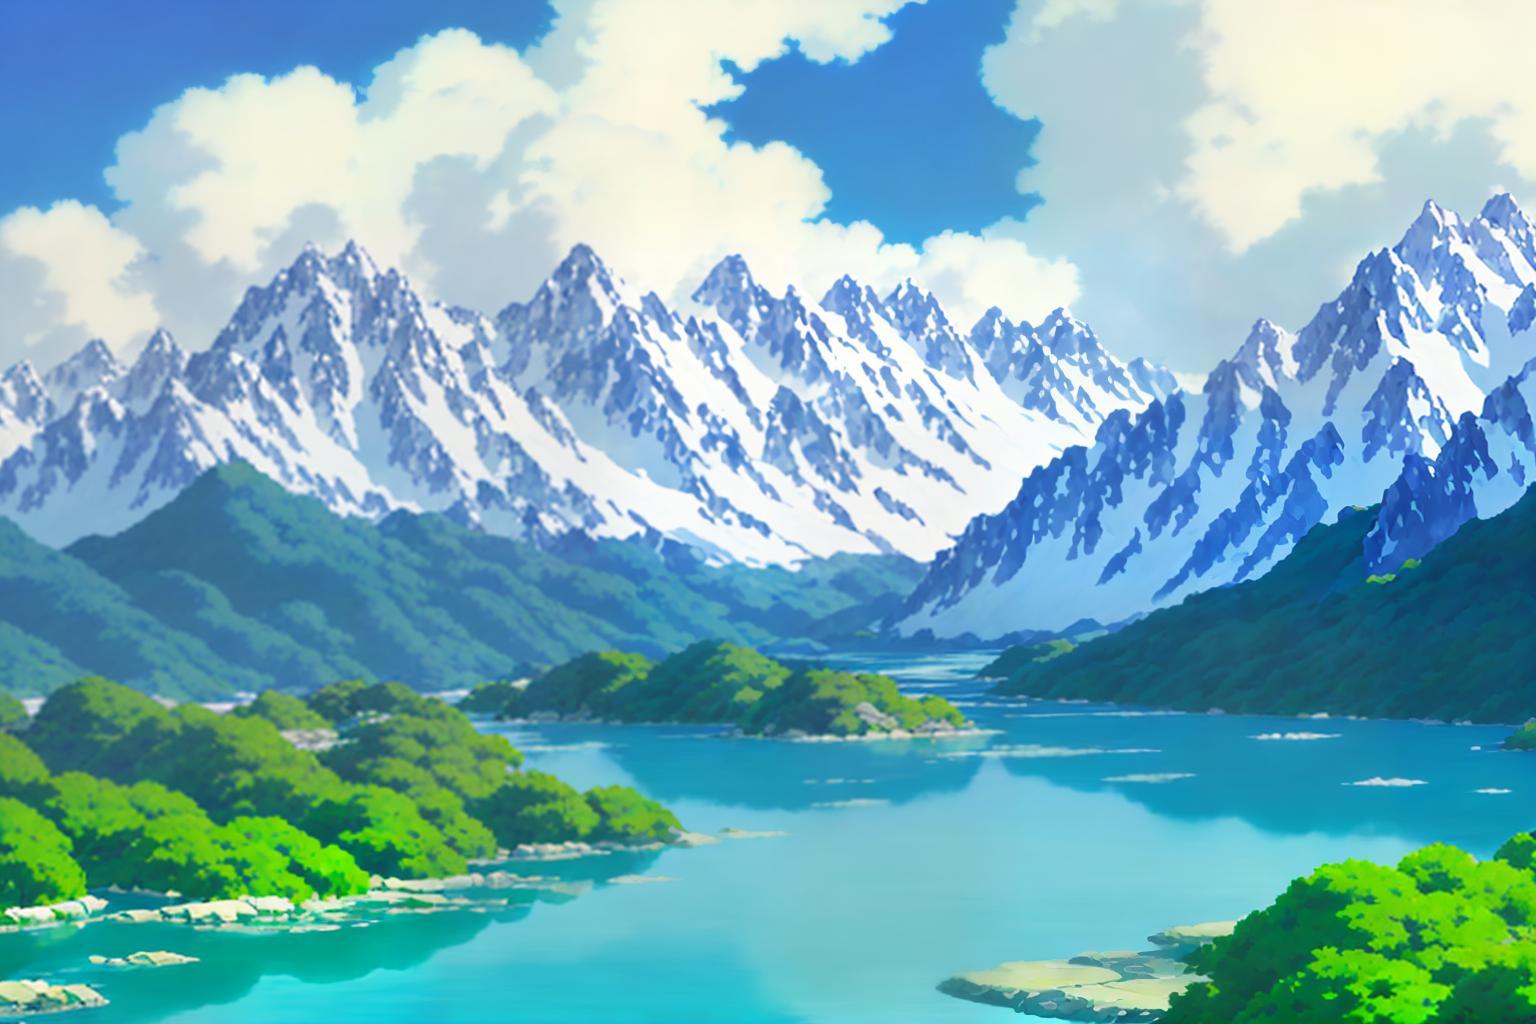 ai generated Studio Ghibli wallpaper. Beautiful landscape depicting mountains, snow, lake and trees on a sunny day. The colors are blue, green and white.